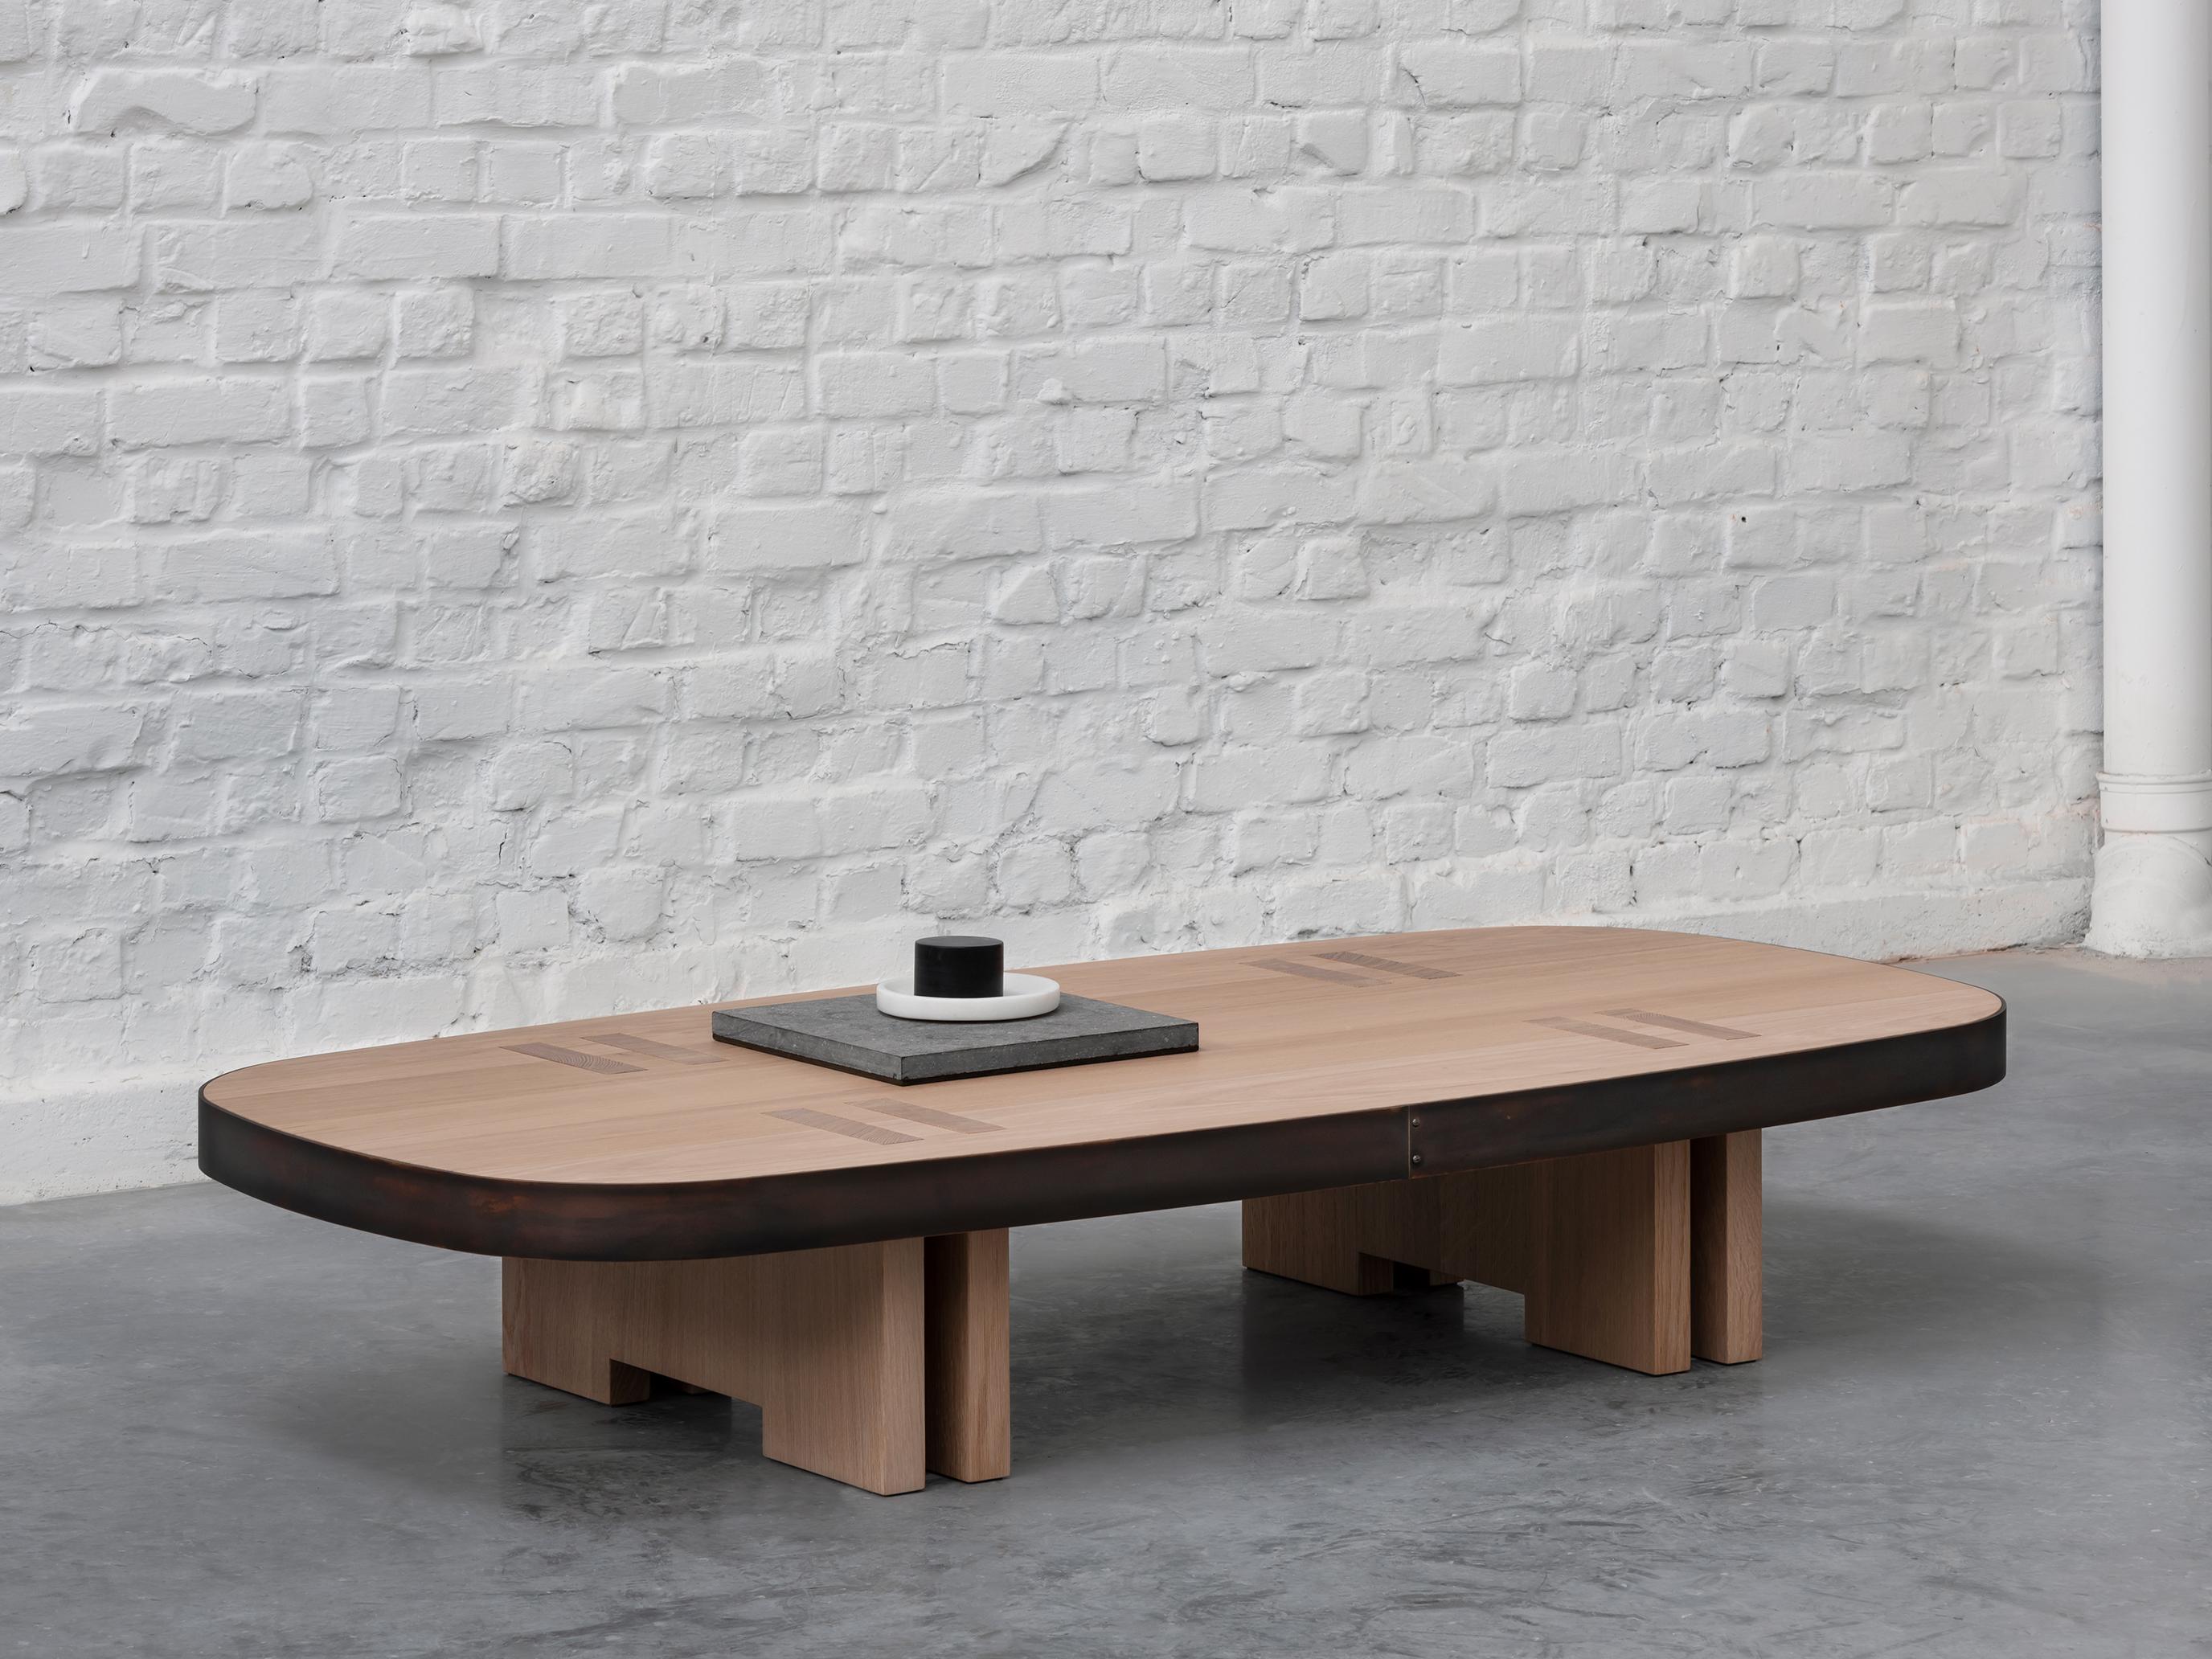 Rift coffee table by Andy Kerstens
Dimensions: 160 x 80 x H 28 cm
Materials: bleached oak, patinated bronze
Other types of wood and sizes available, Bleached European Oak, dark stained American Walnut. 

The bench is a simplified extension of